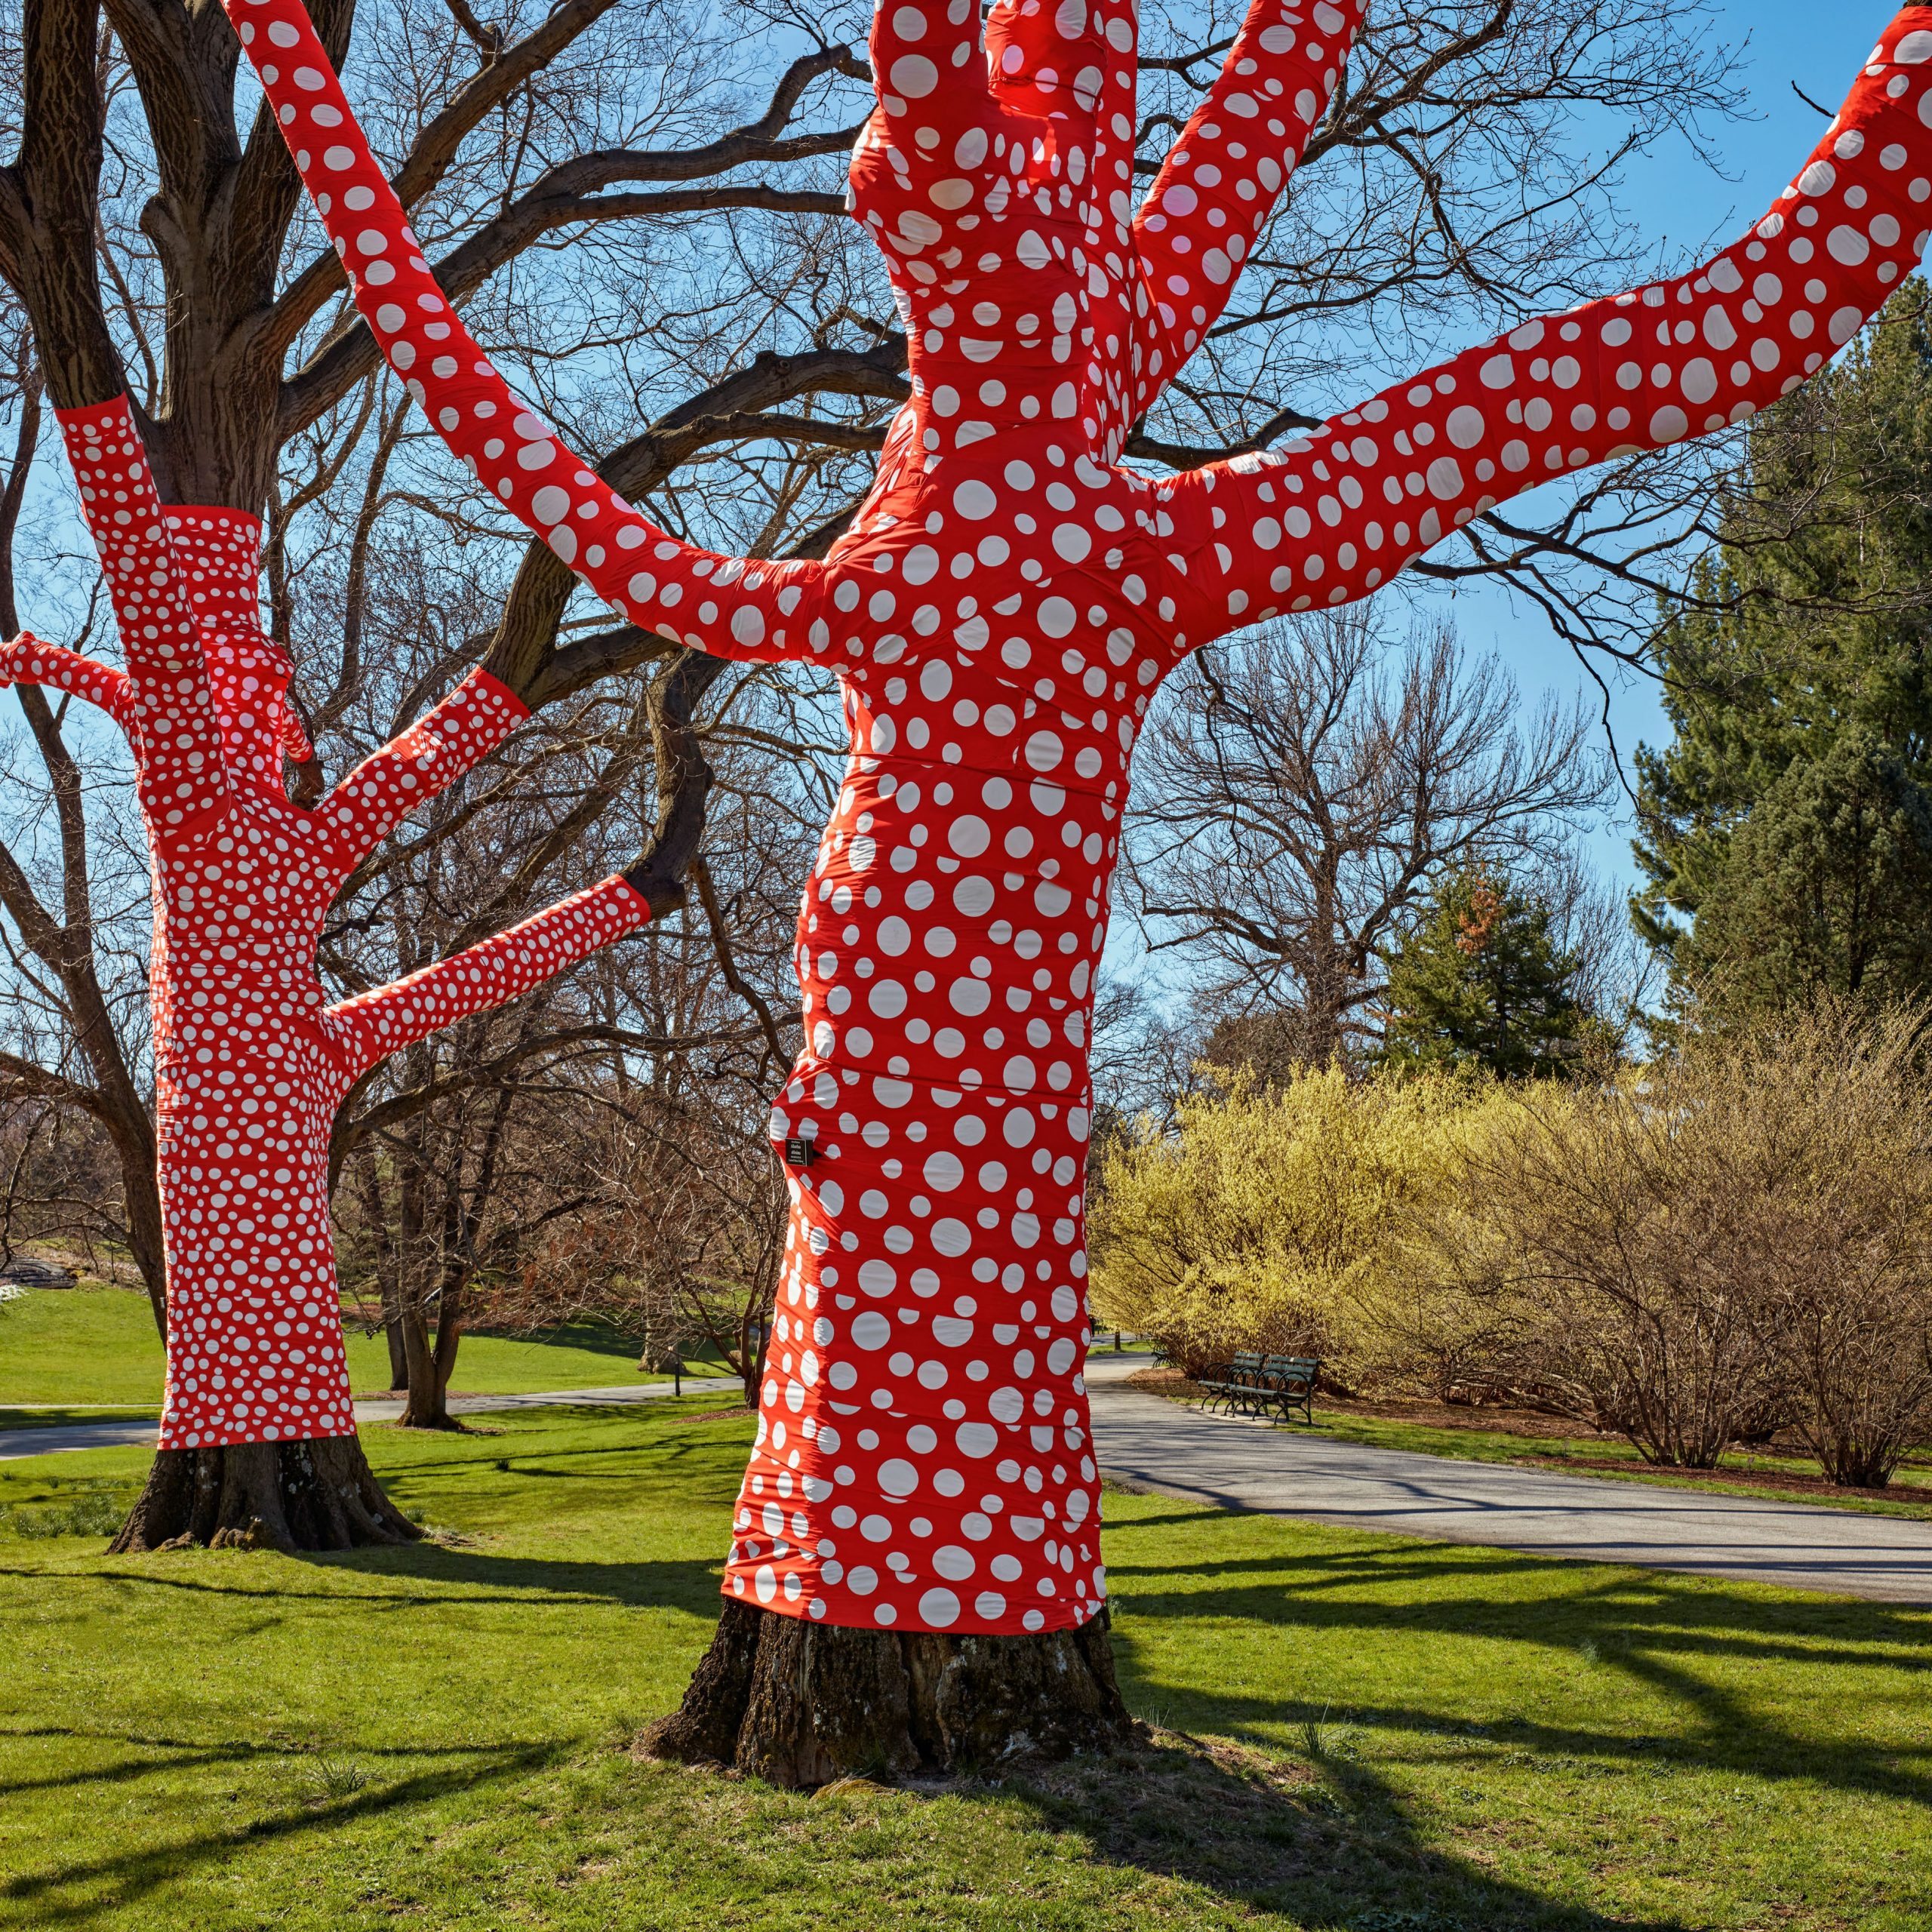 Yayoi Kusama, “Ascension of Polka Dots on the Trees”, 2002/2021, The New York Botanical Garden, Printed polyester fabric, bungees, and aluminum staples installed on existing trees, Site-specific installation, dimensions variable, Collection of the artist.. Photo by Robert Benson Photography